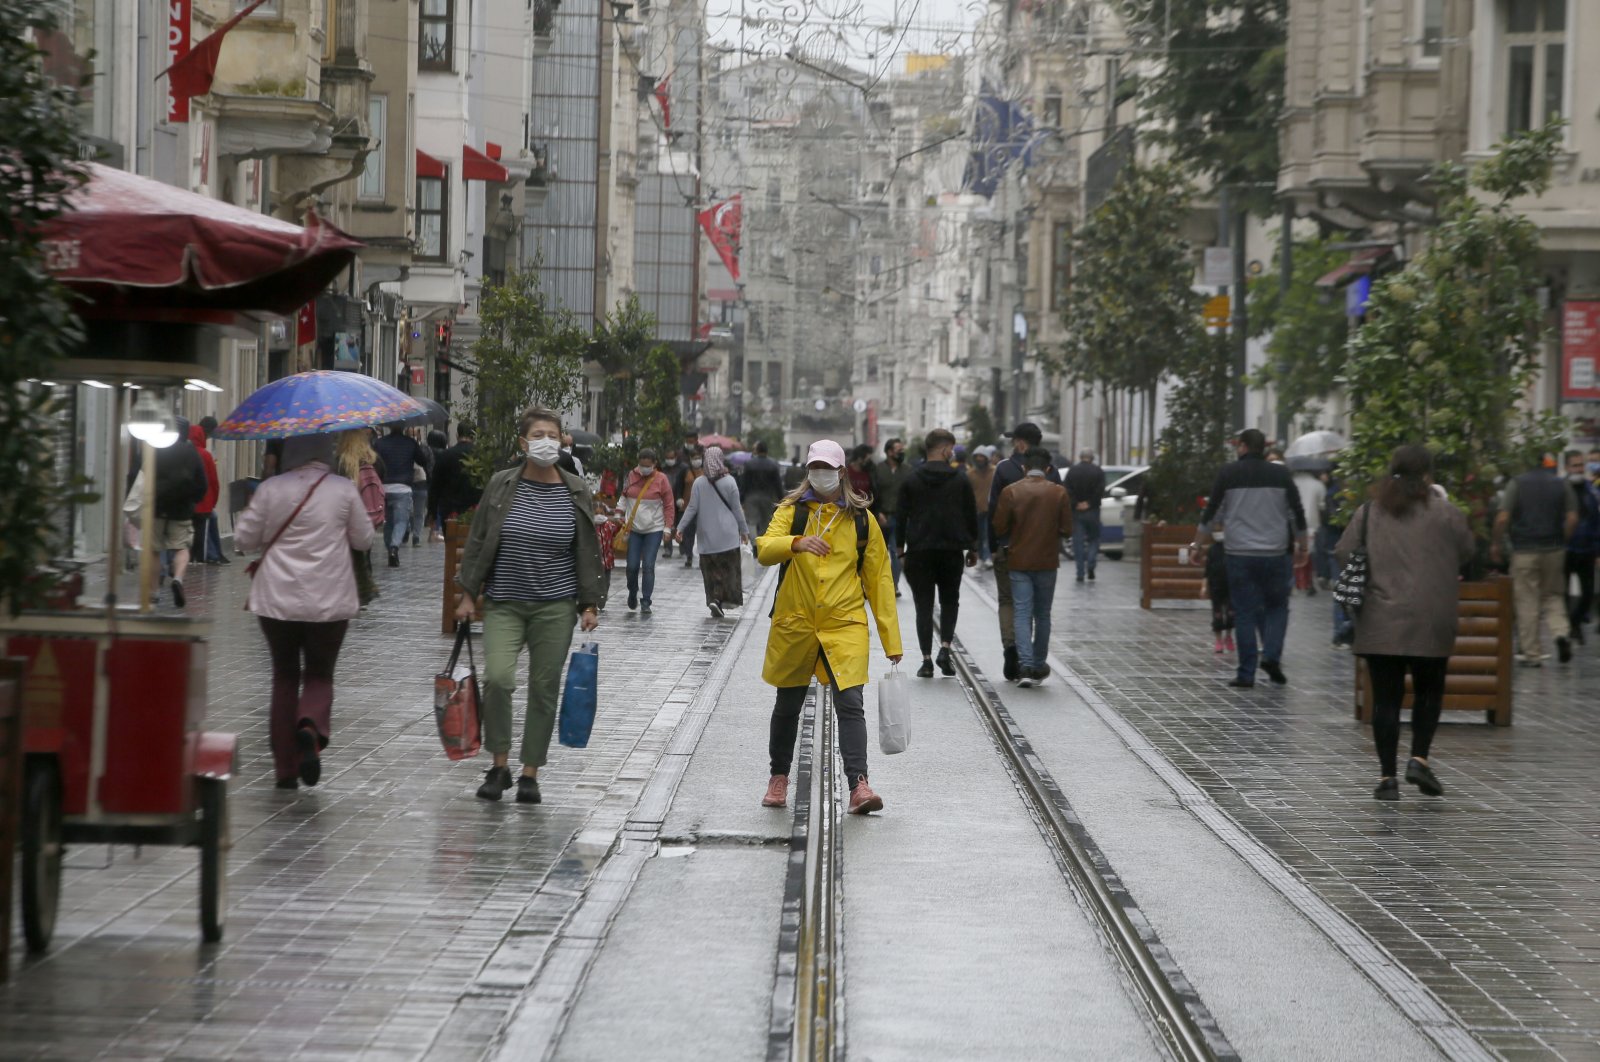 People walk on Istiklal Street in Taksim, Istanbul, Wednesday, May 27, 2020. (AA Photo)